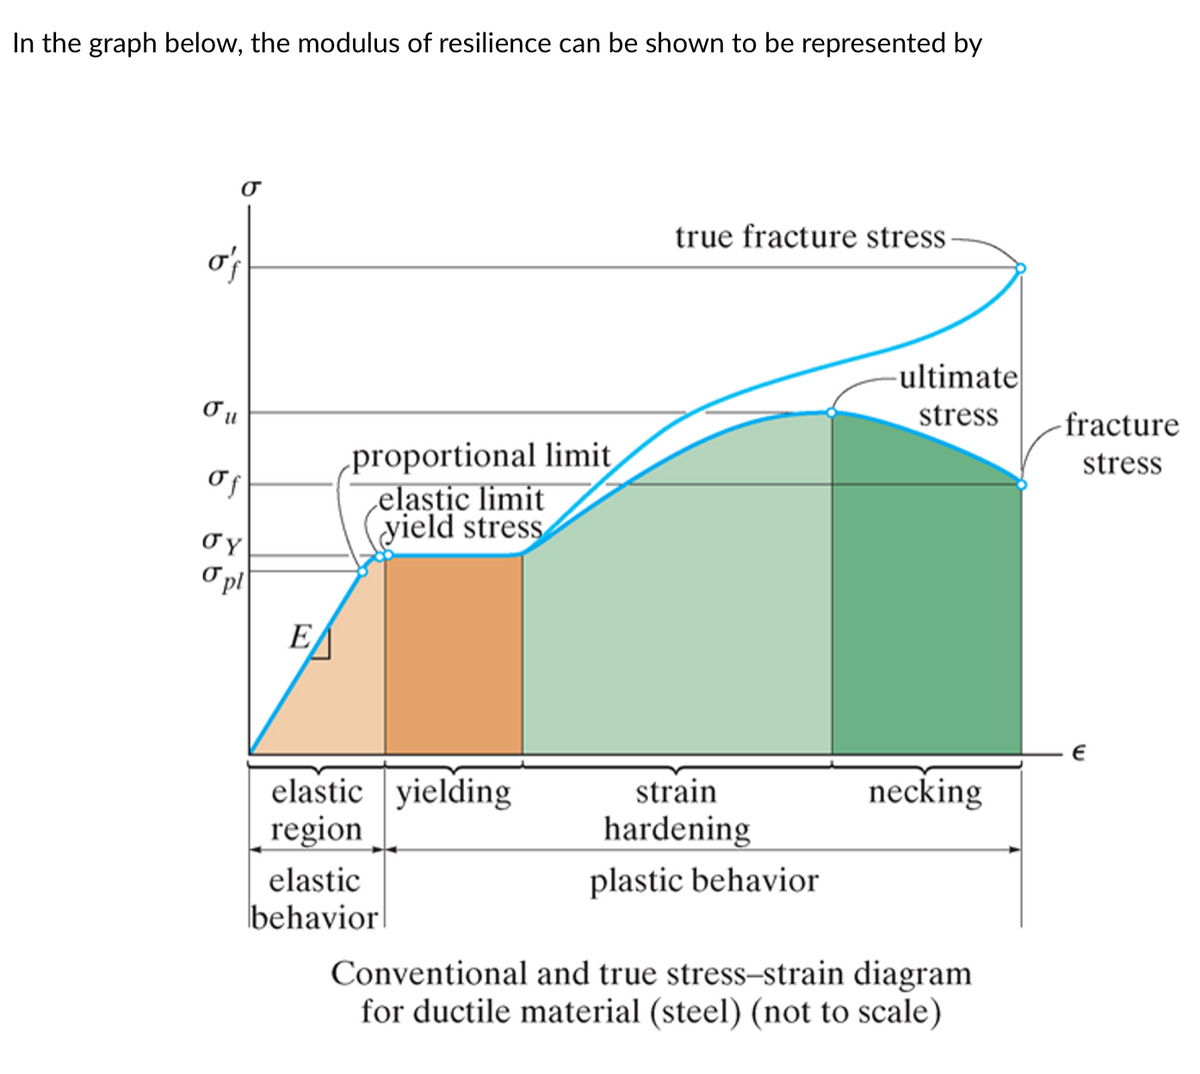 In the graph below, the modulus of resilience can be shown to be represented by
σ
o'f
σu
of
σY
o pl
E
proportional limit
elastic limit
yield stress
elastic yielding
region
elastic
behavior
true fracture stress-
strain
hardening
plastic behavior
-ultimate
stress
necking
Conventional and true stress-strain diagram
for ductile material (steel) (not to scale)
-fracture
stress
€